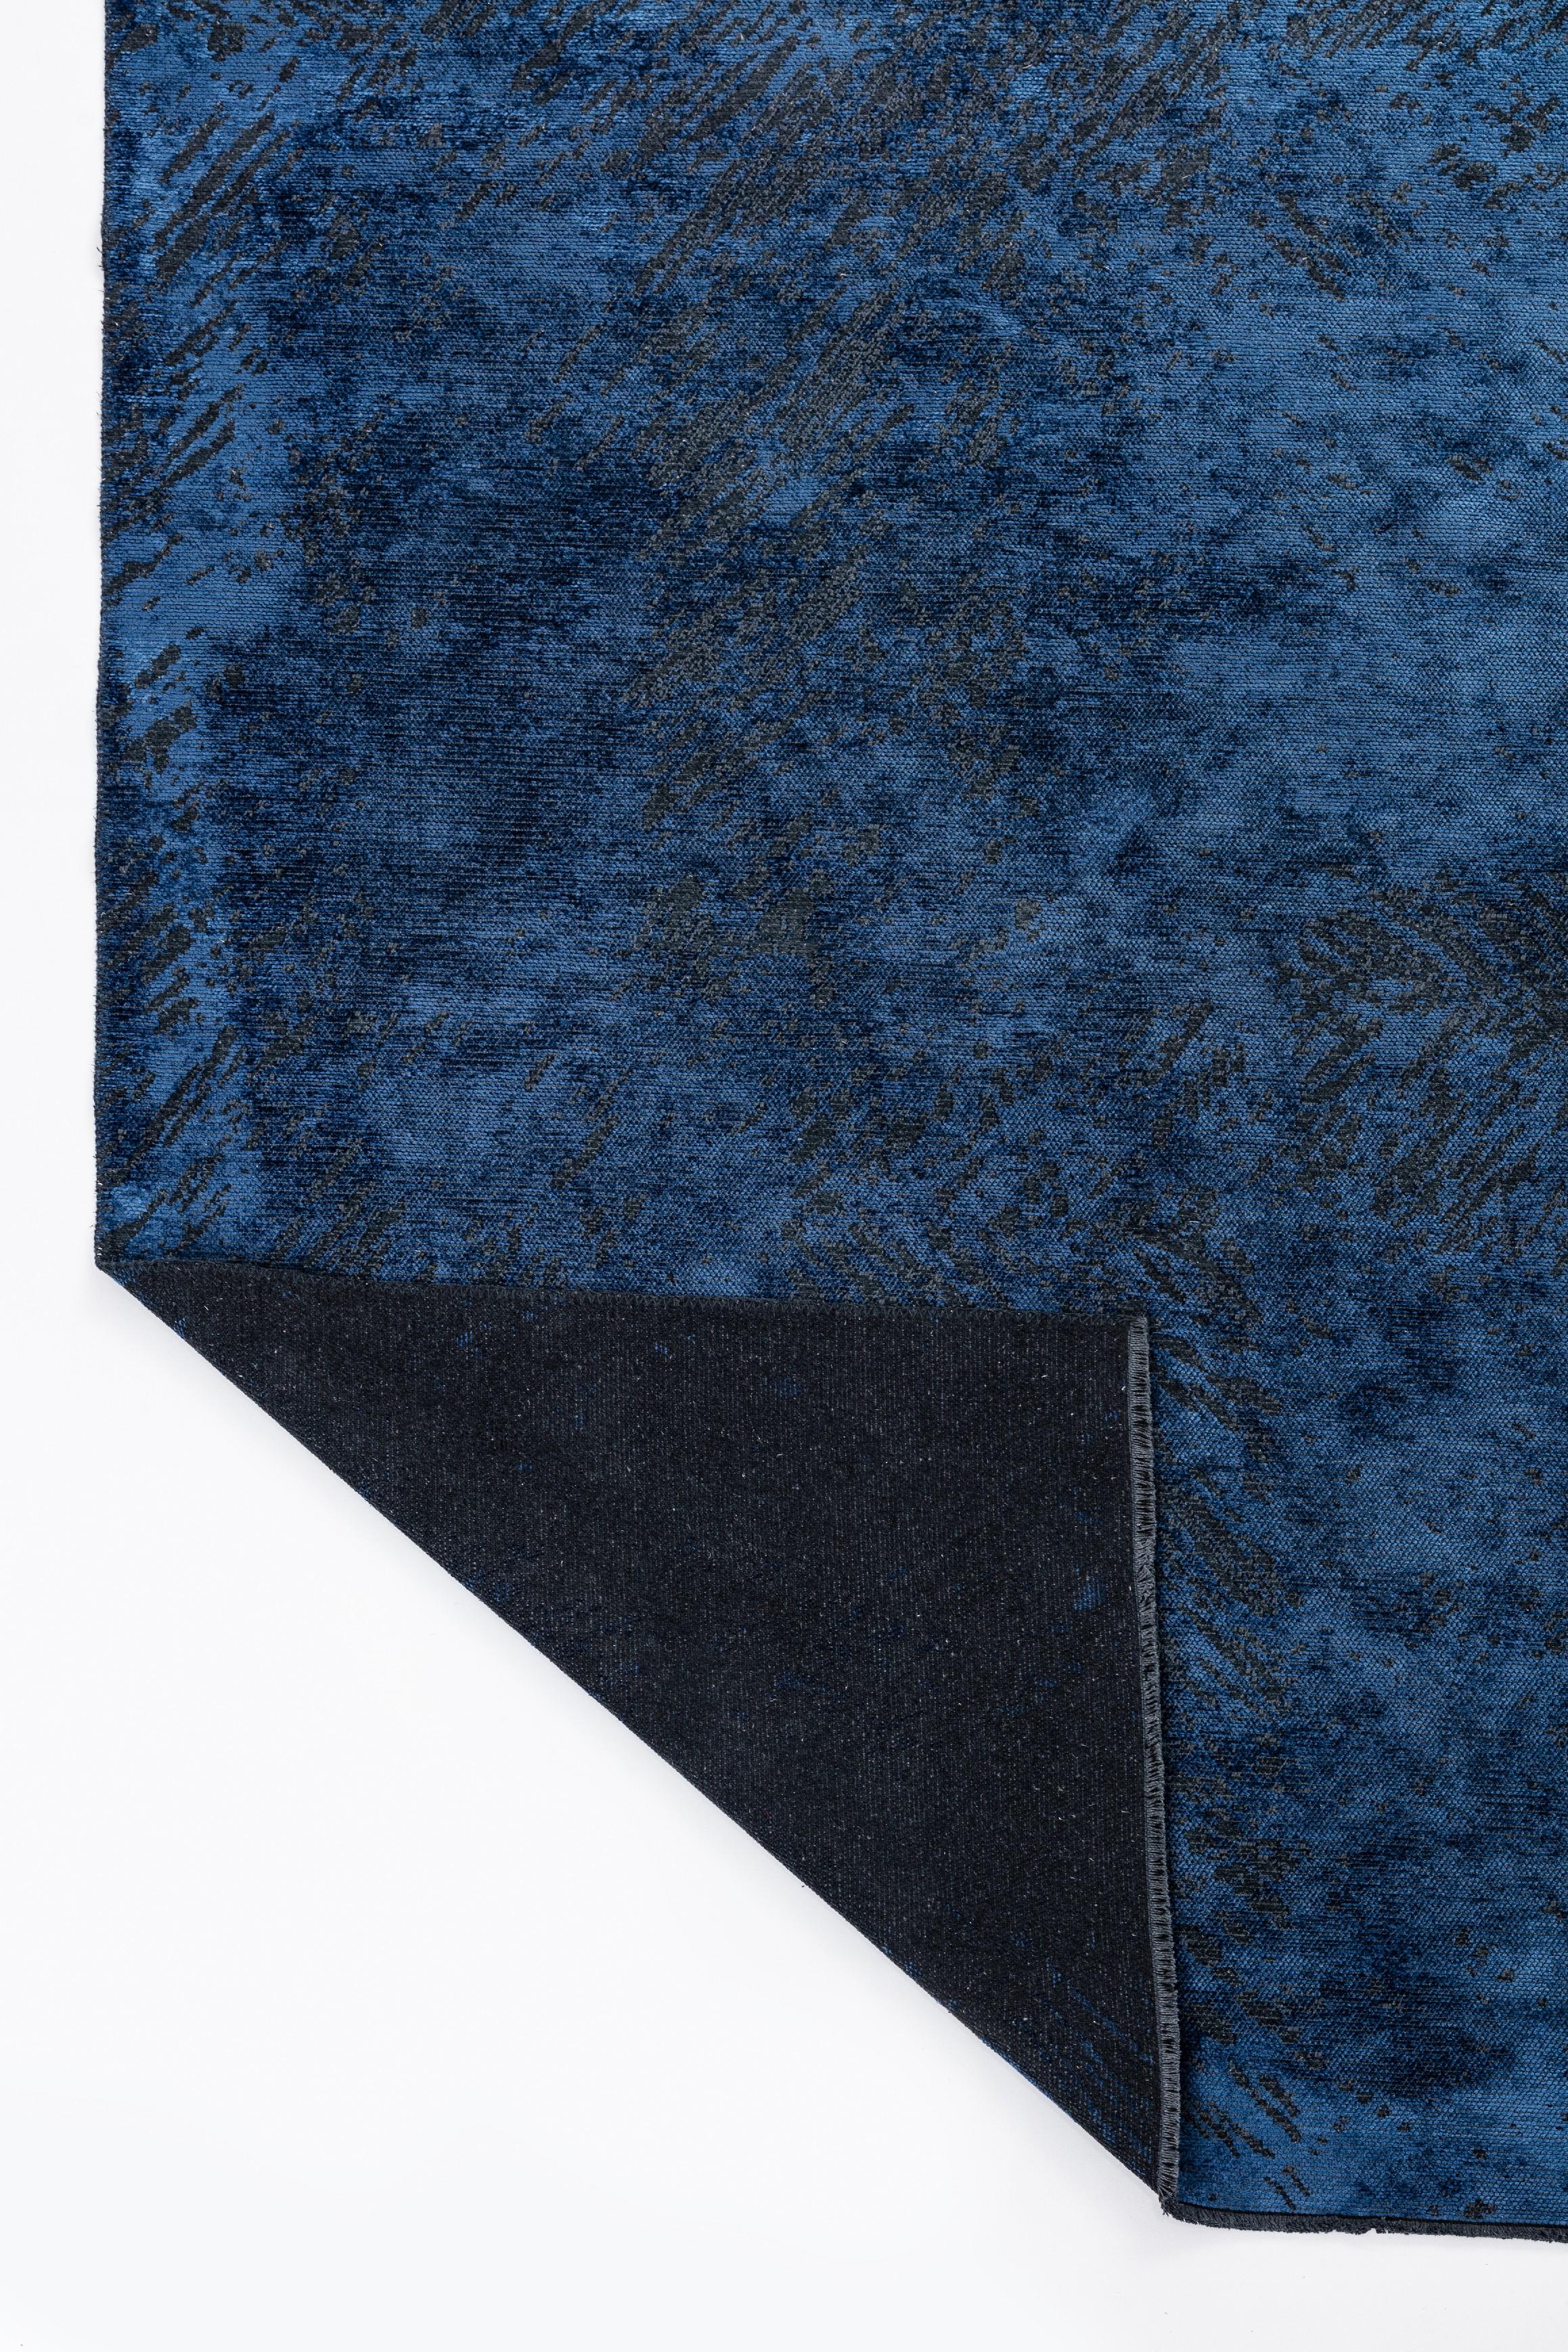 For Sale:  (Blue) Modern Abstract Luxury Area Rug 3